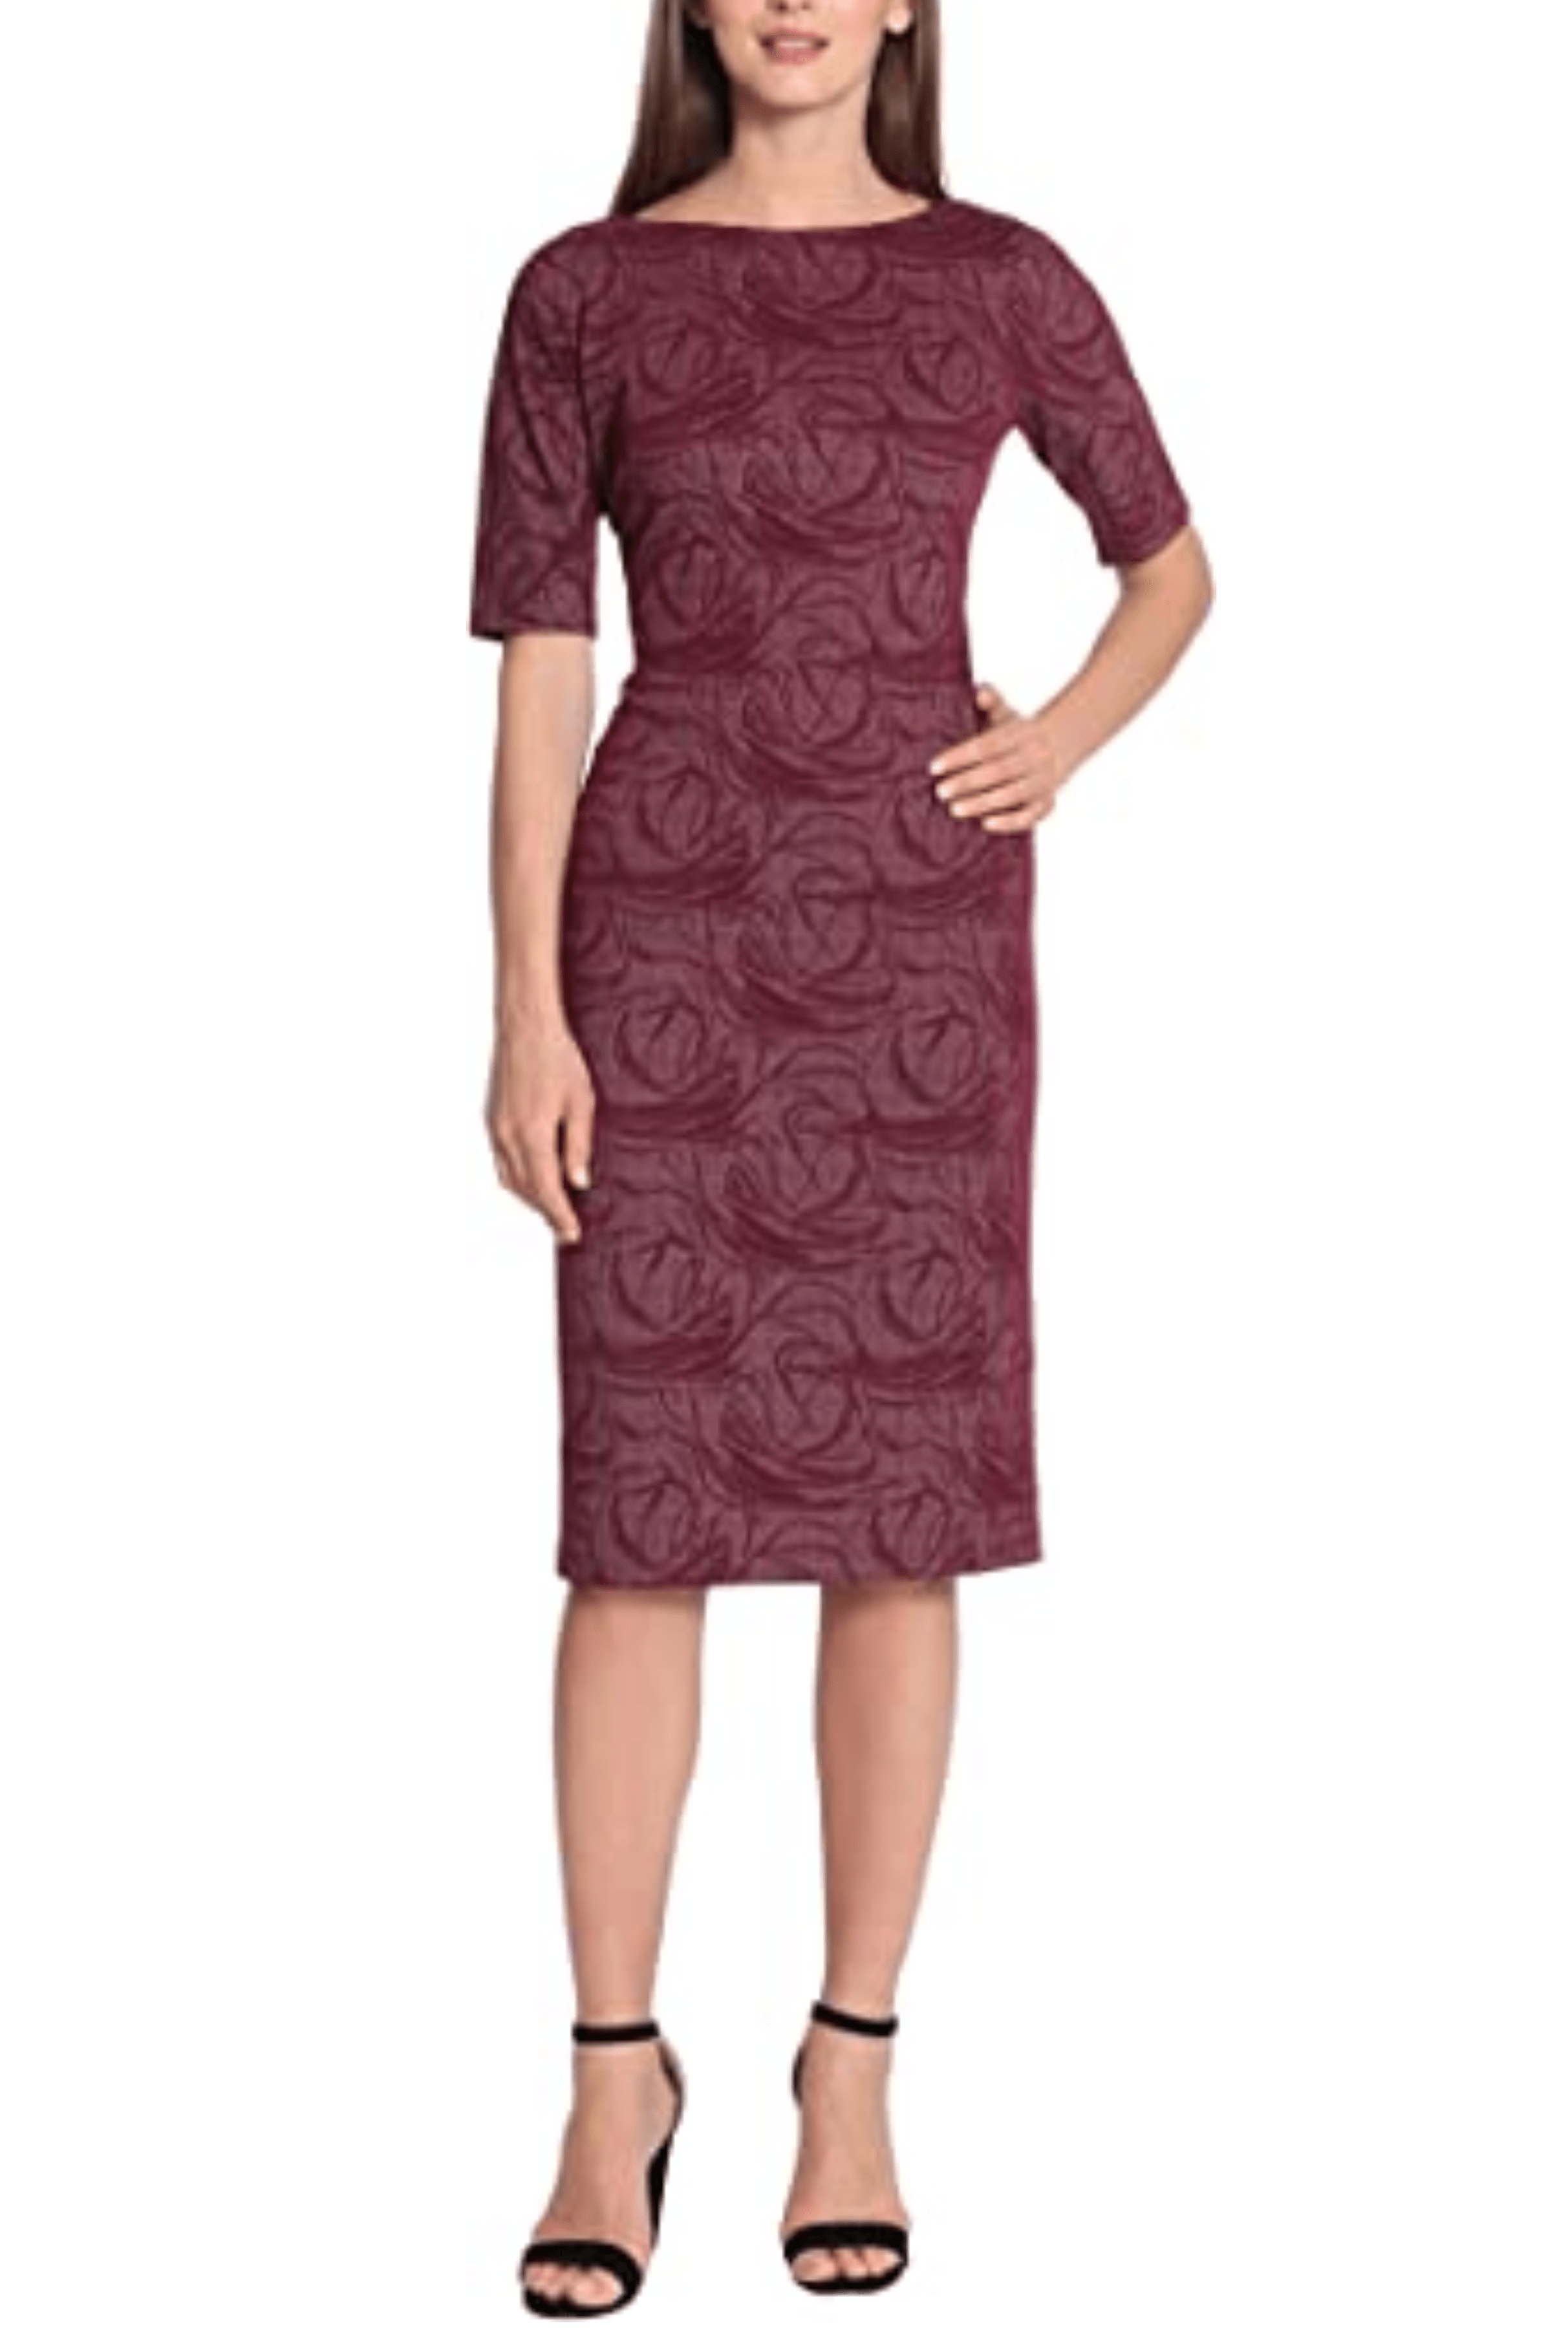 Maggy London GT158M - Fitted Jacquard Dress
